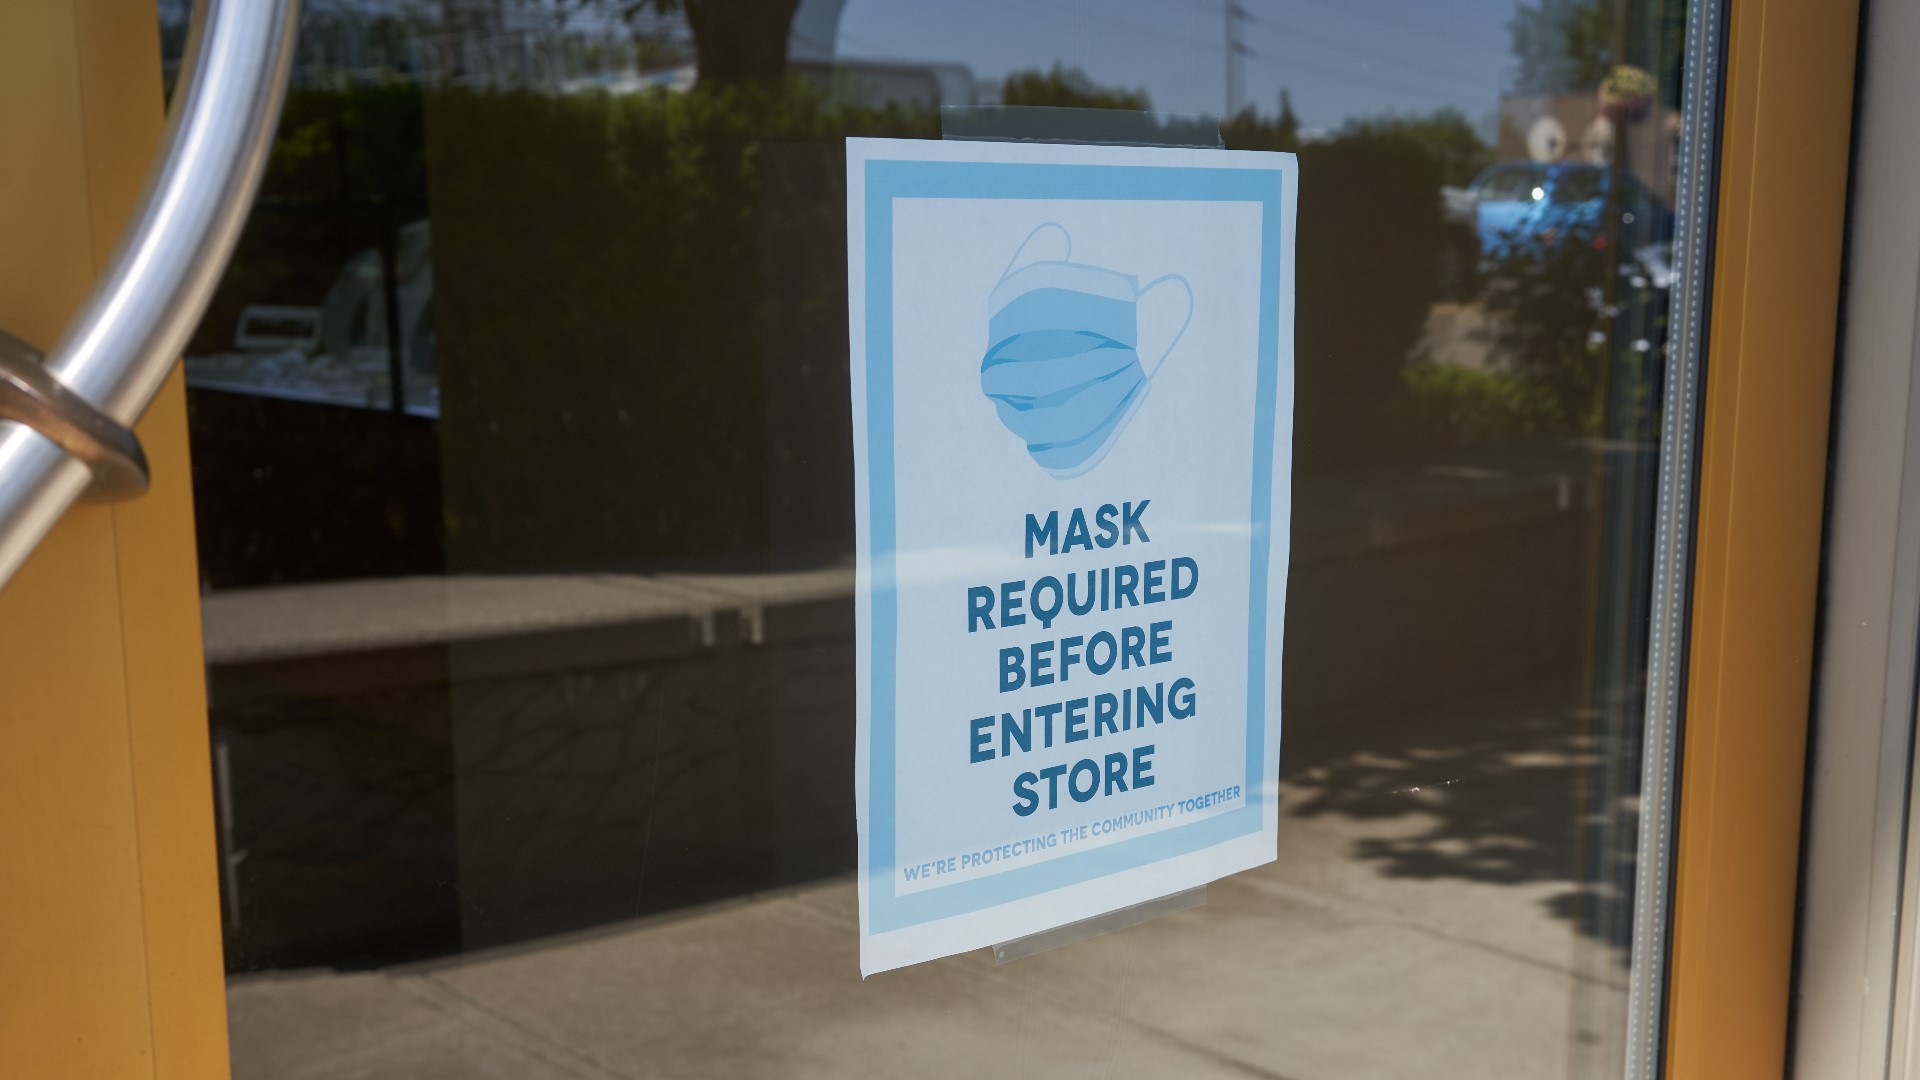 Mecklenburg County leaders said the new mask mandate will actually take effect Aug. 31, not Aug. 28 as originally expected.